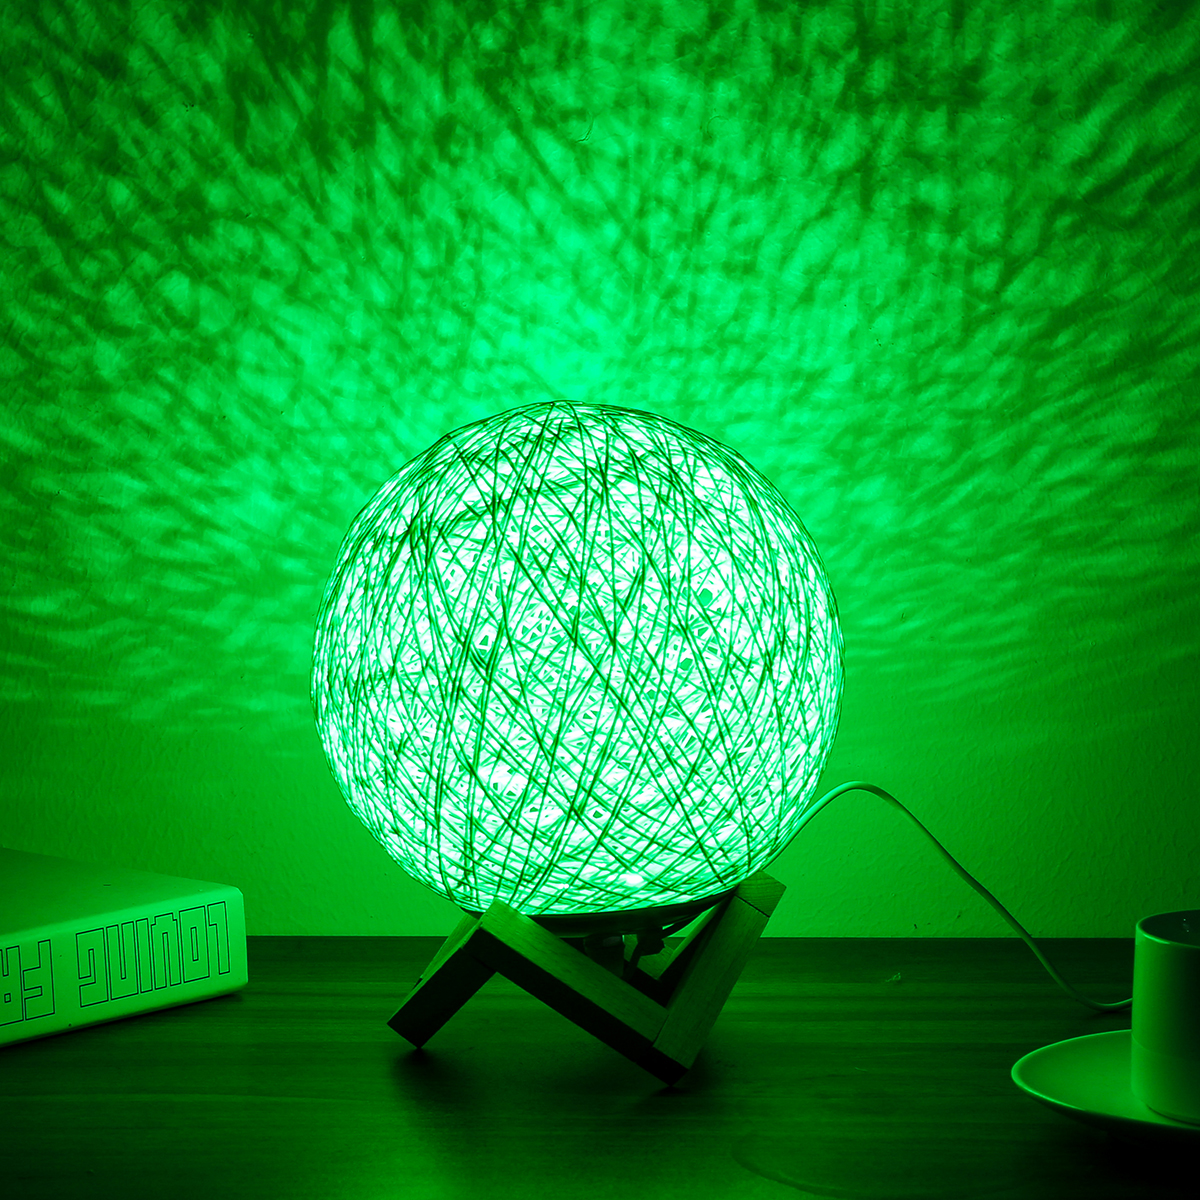 USB-Wooden-Rattan-Table-Light-Dimming-Desk-Bedroom-Night-LED-Ball-Home-Decorations-1627078-2